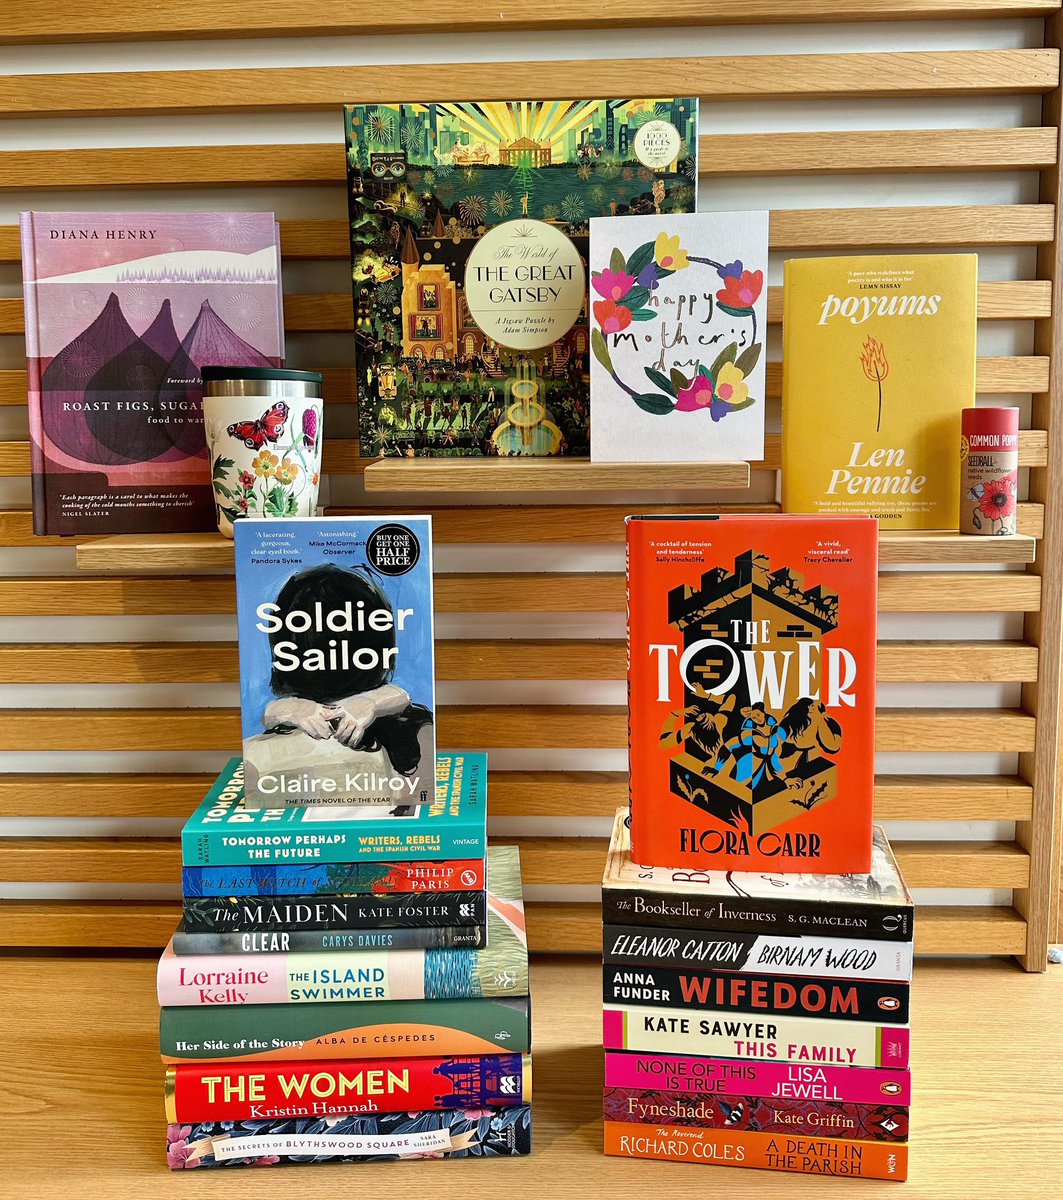 With Mother’s Day coming up this Sunday the 10th March, we thought we’d share some gift ideas! Treat your loved one to an incredible new read, a fantastic literary jigsaw, or a lovely notebook this Mother’s Day. We have something for everyone 💝. #waterstones